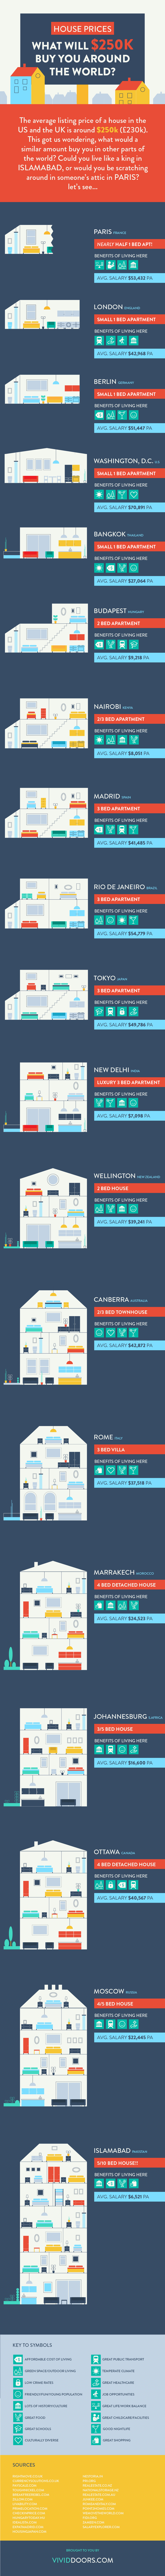 Here’s The Property $250k Will Buy You In 19 Iconic Capital Cities #infographic